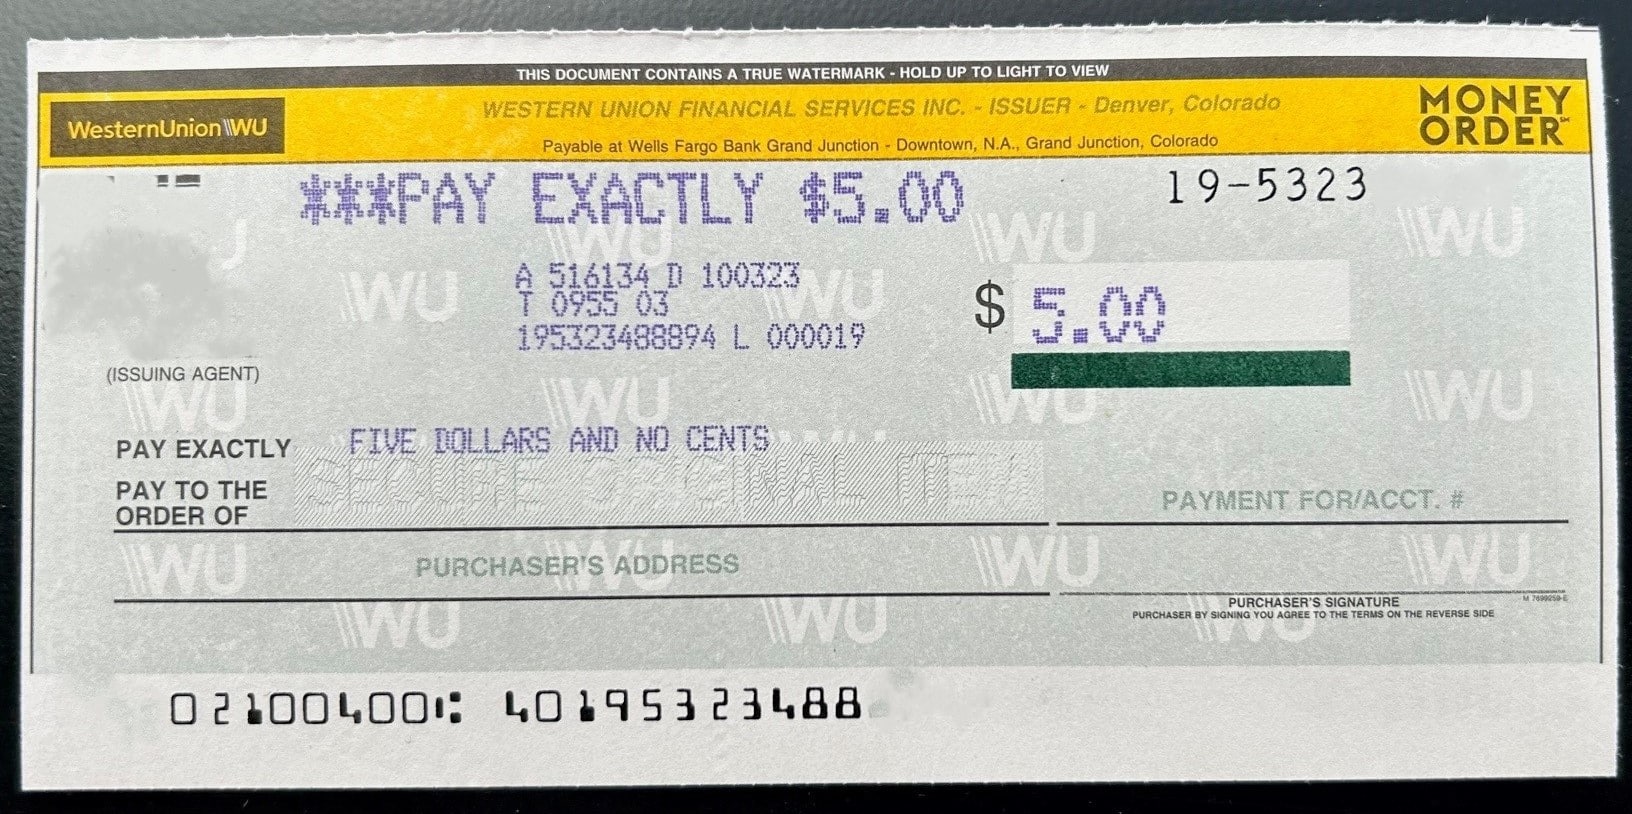 A photo of a money order from Western Union